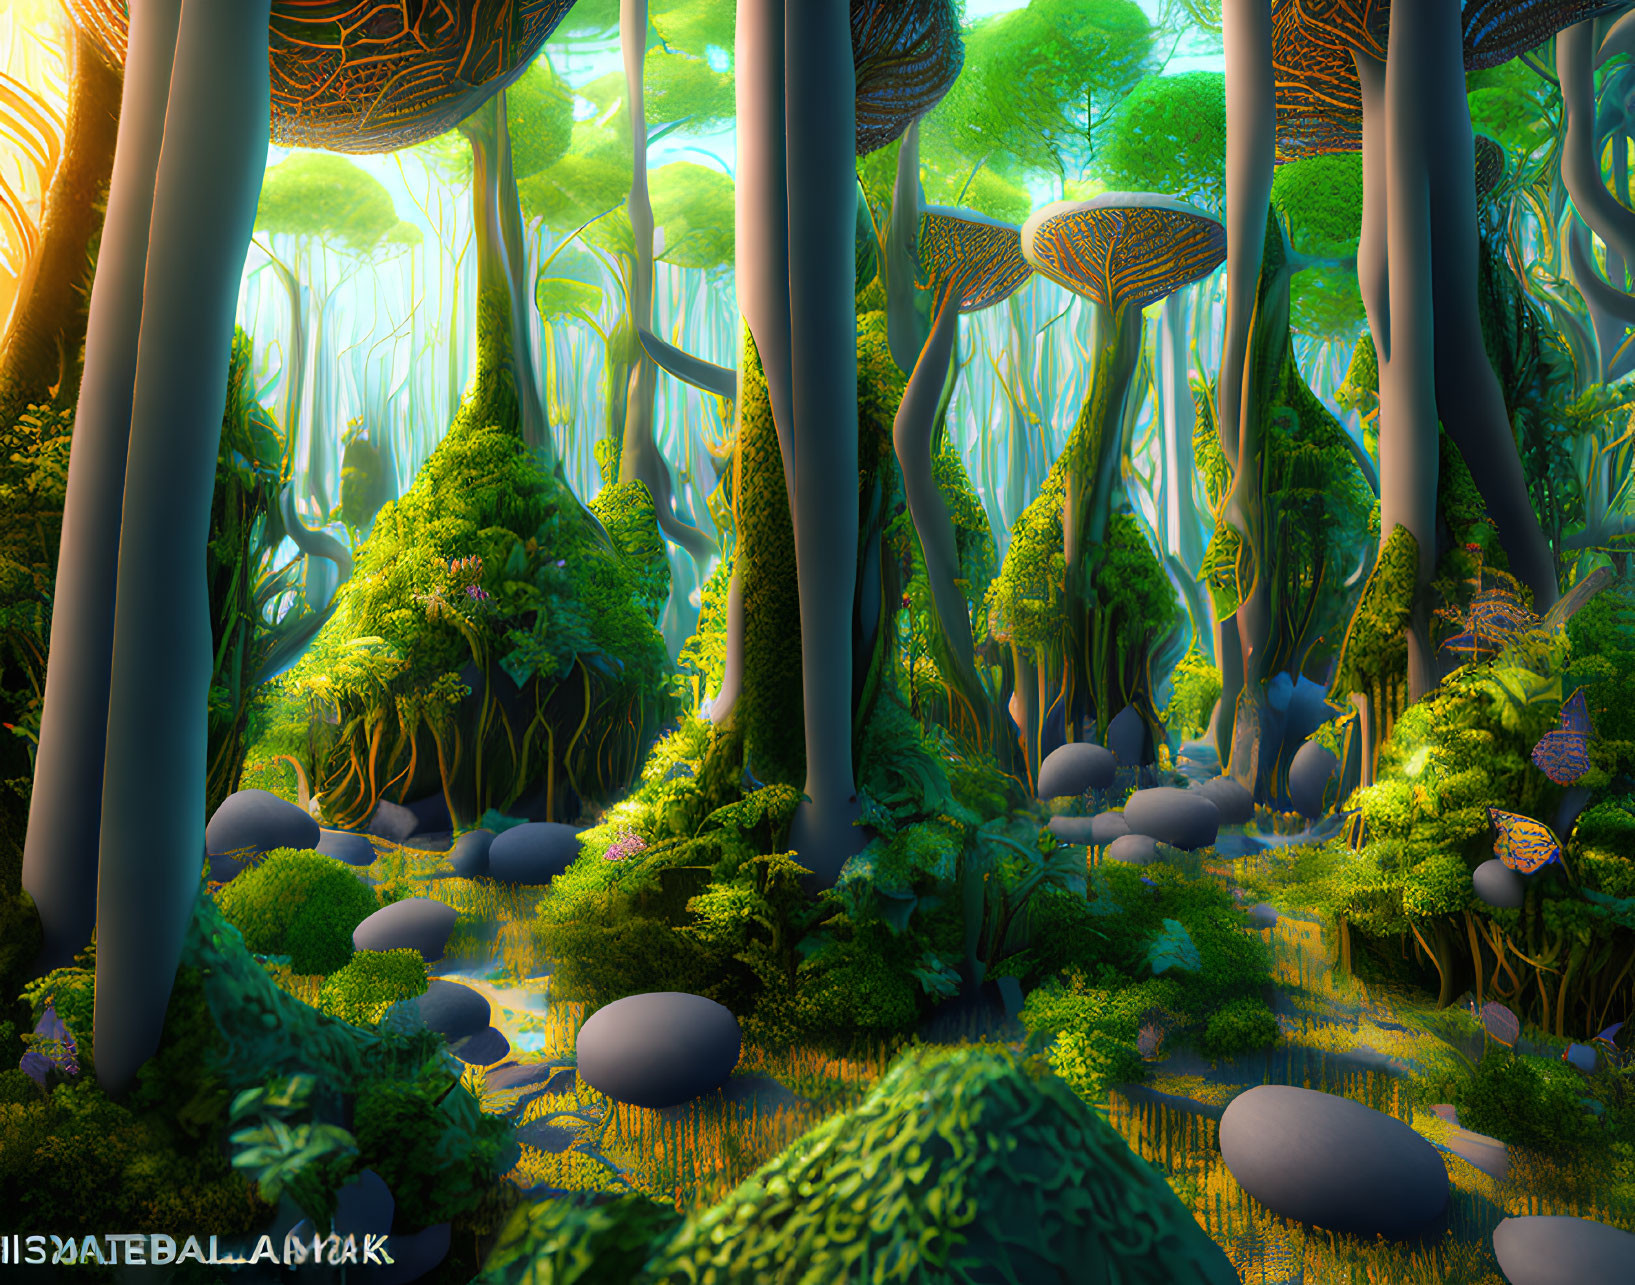 Mystical forest with towering trees and large mushrooms